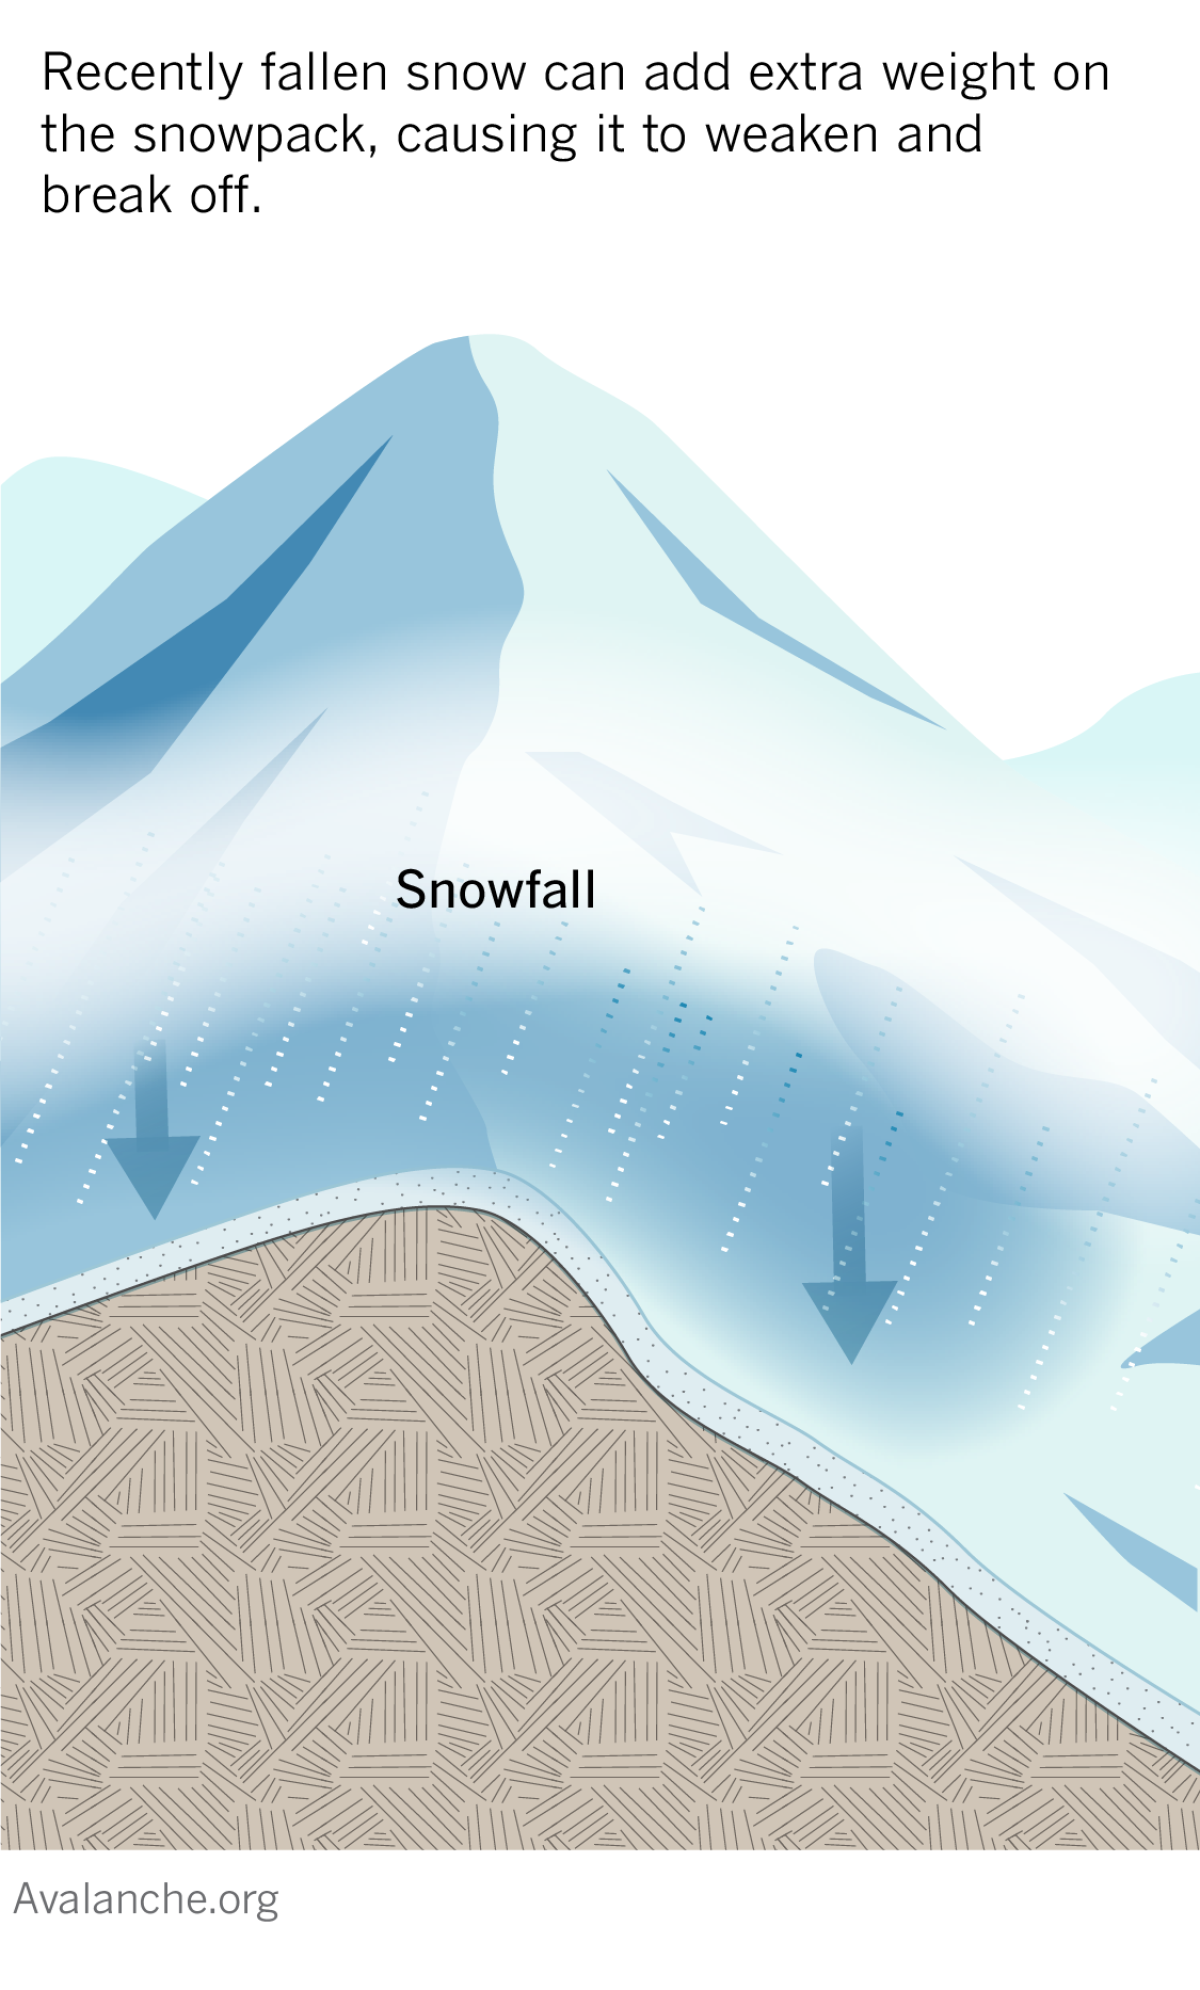 Diagram shows recently fallen snow can add extra weight on the snowpack, causing it to weaken and break off.